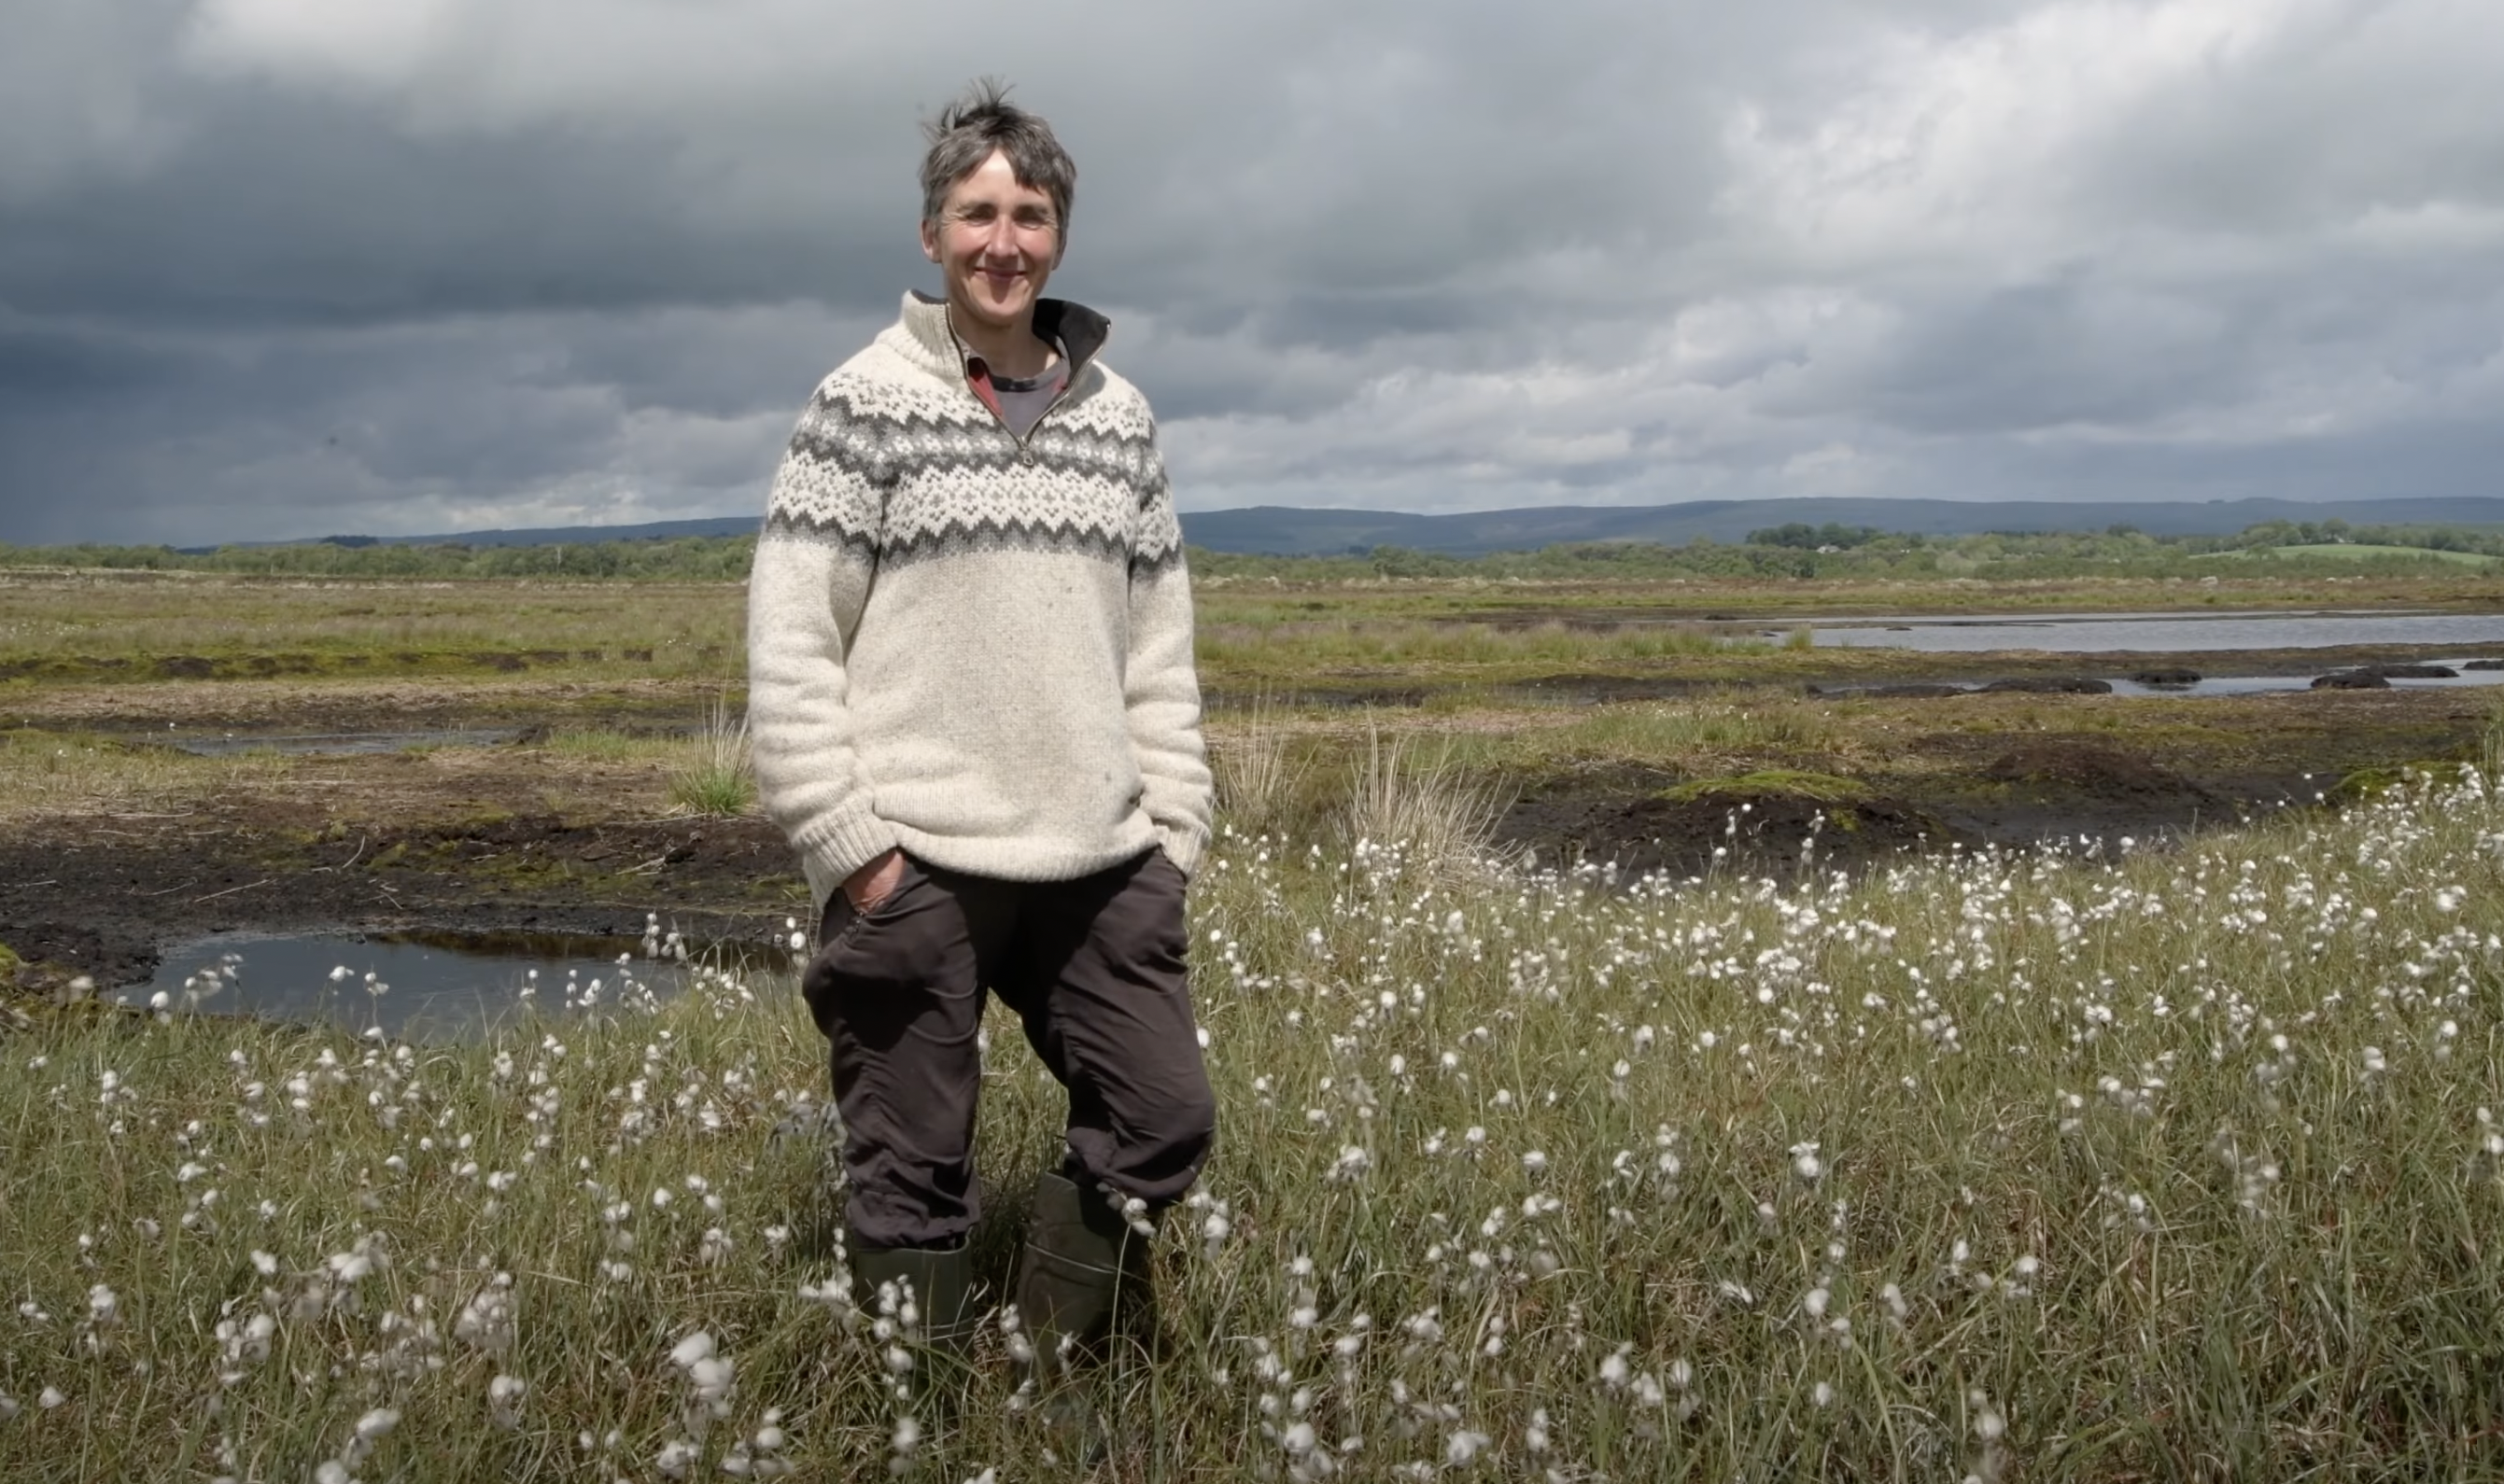 A woman in a pale jumper stands among cotton grass, with a grey cloudy sky